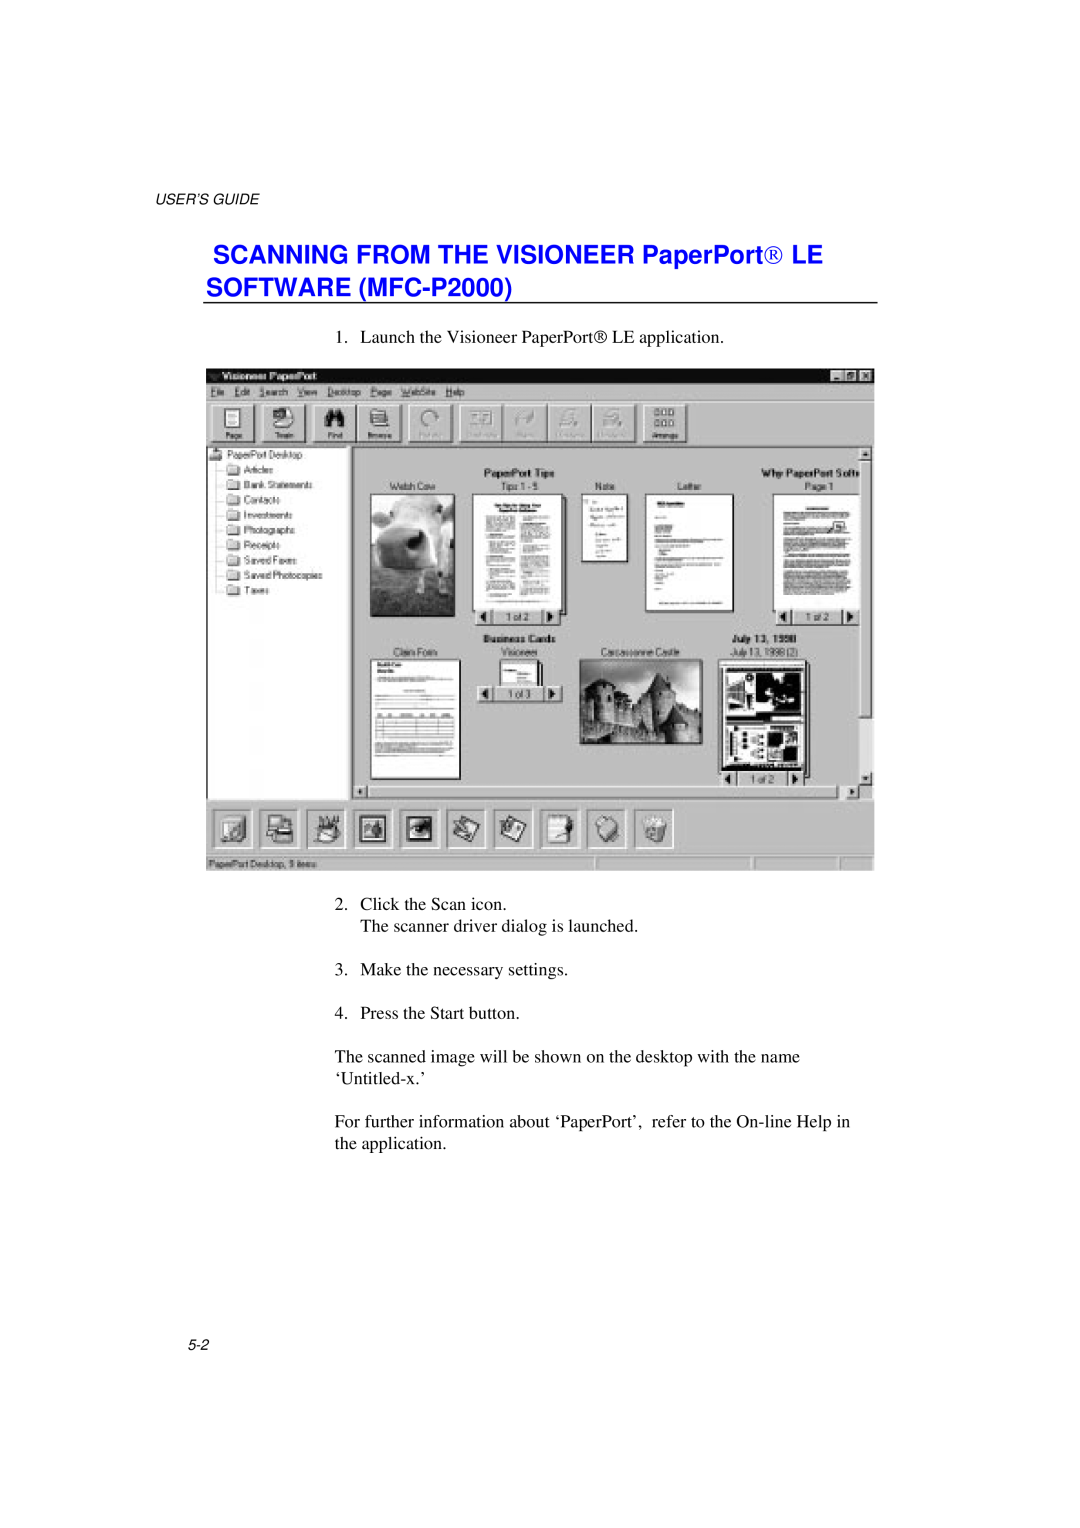 Brother MFC/HL-P2000 manual SCANNING FROM THE VISIONEER PaperPort LE SOFTWARE MFC-P2000, User’S Guide 